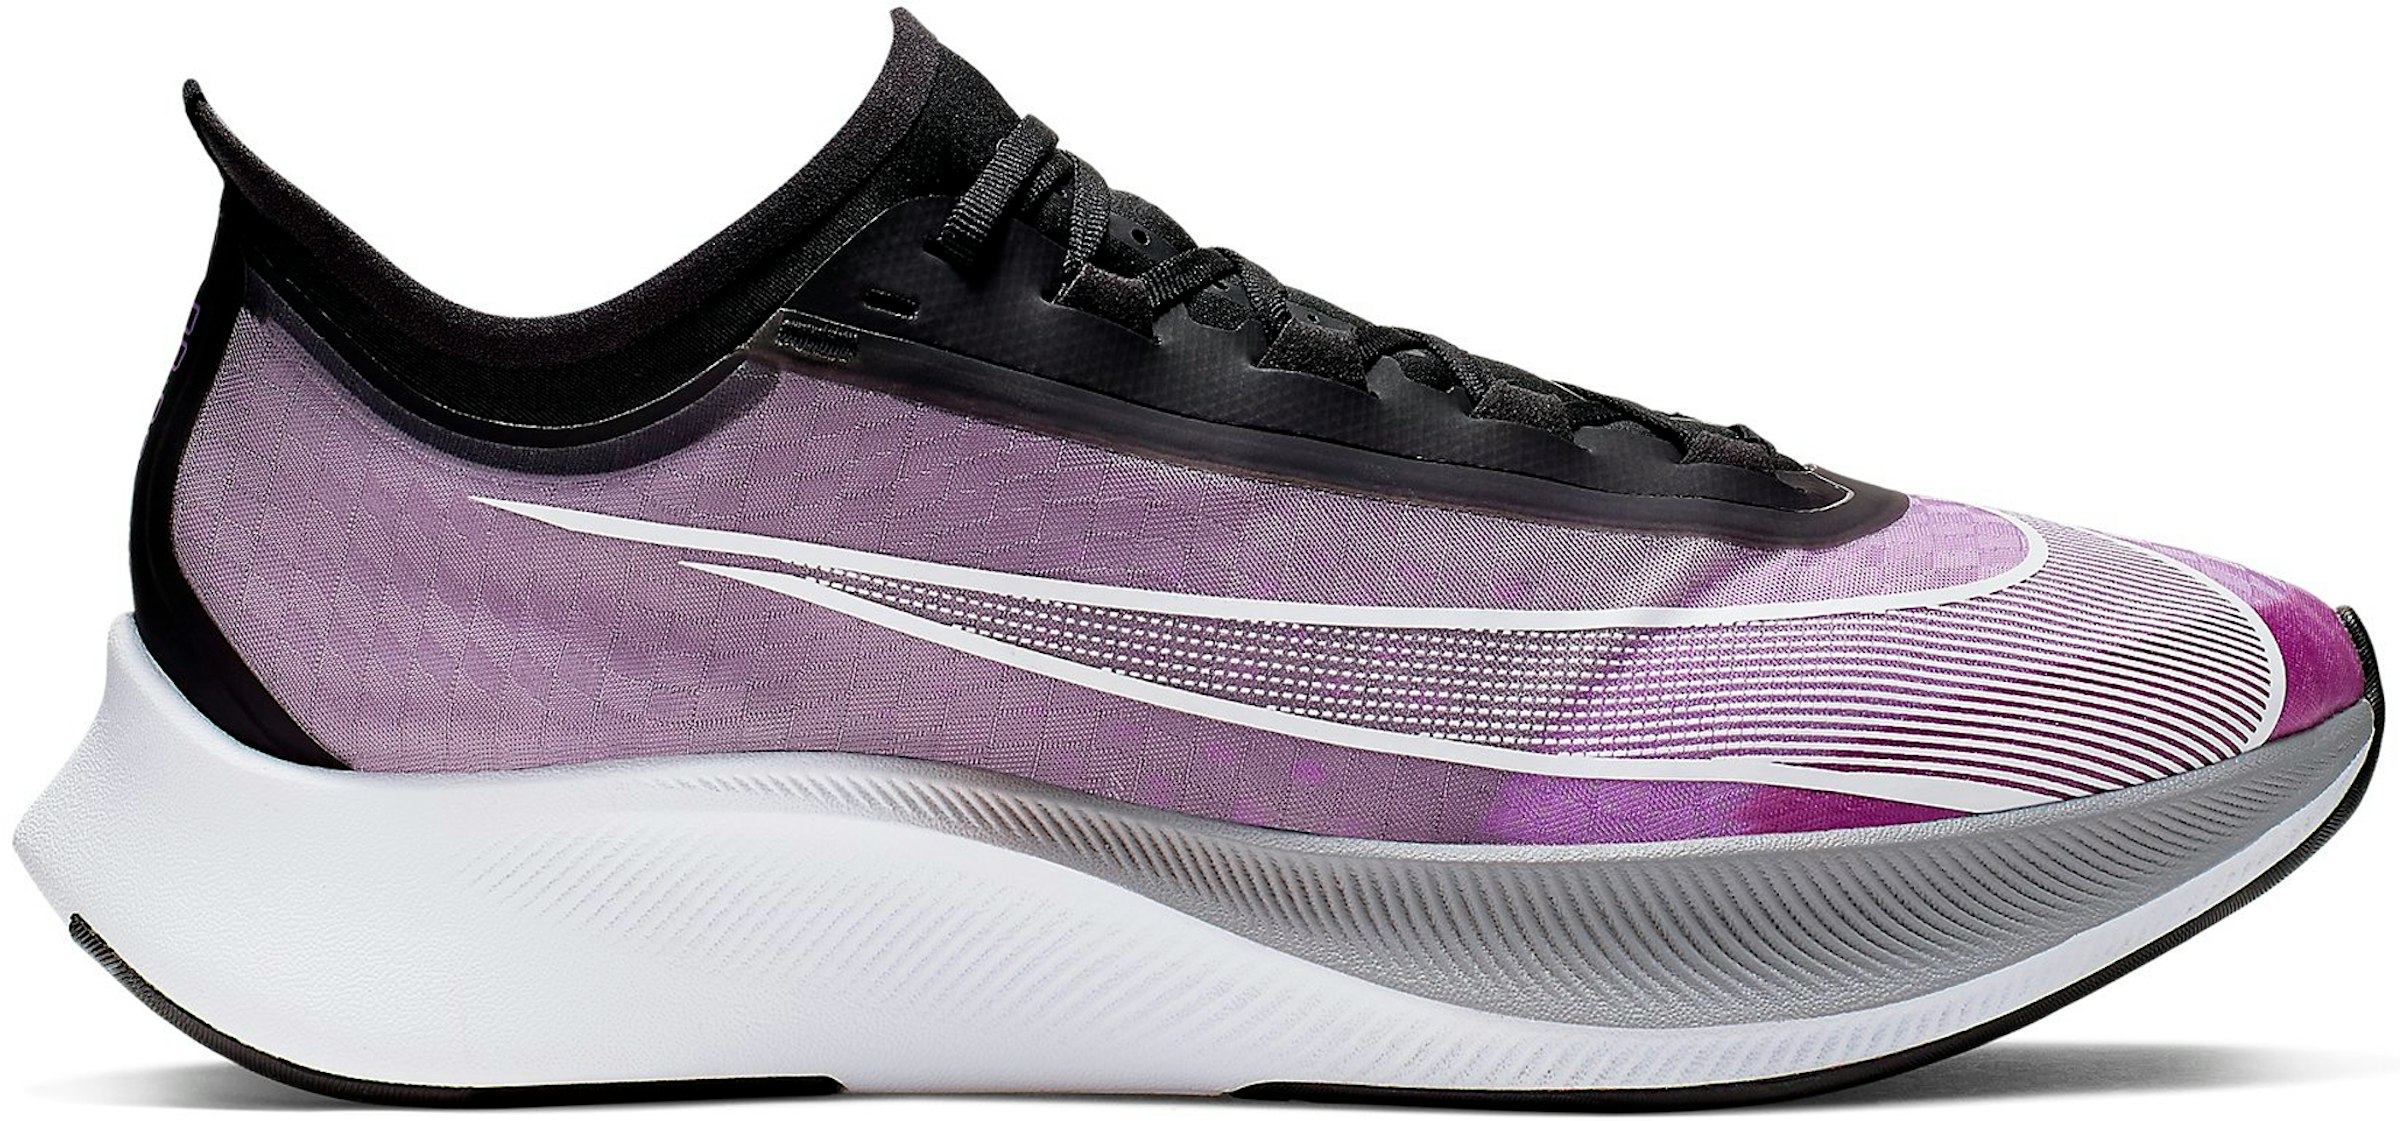 tratar con Decano saber Nike Zoom Fly 3 Hyper Violet Hombre - AT8240-500 - MX